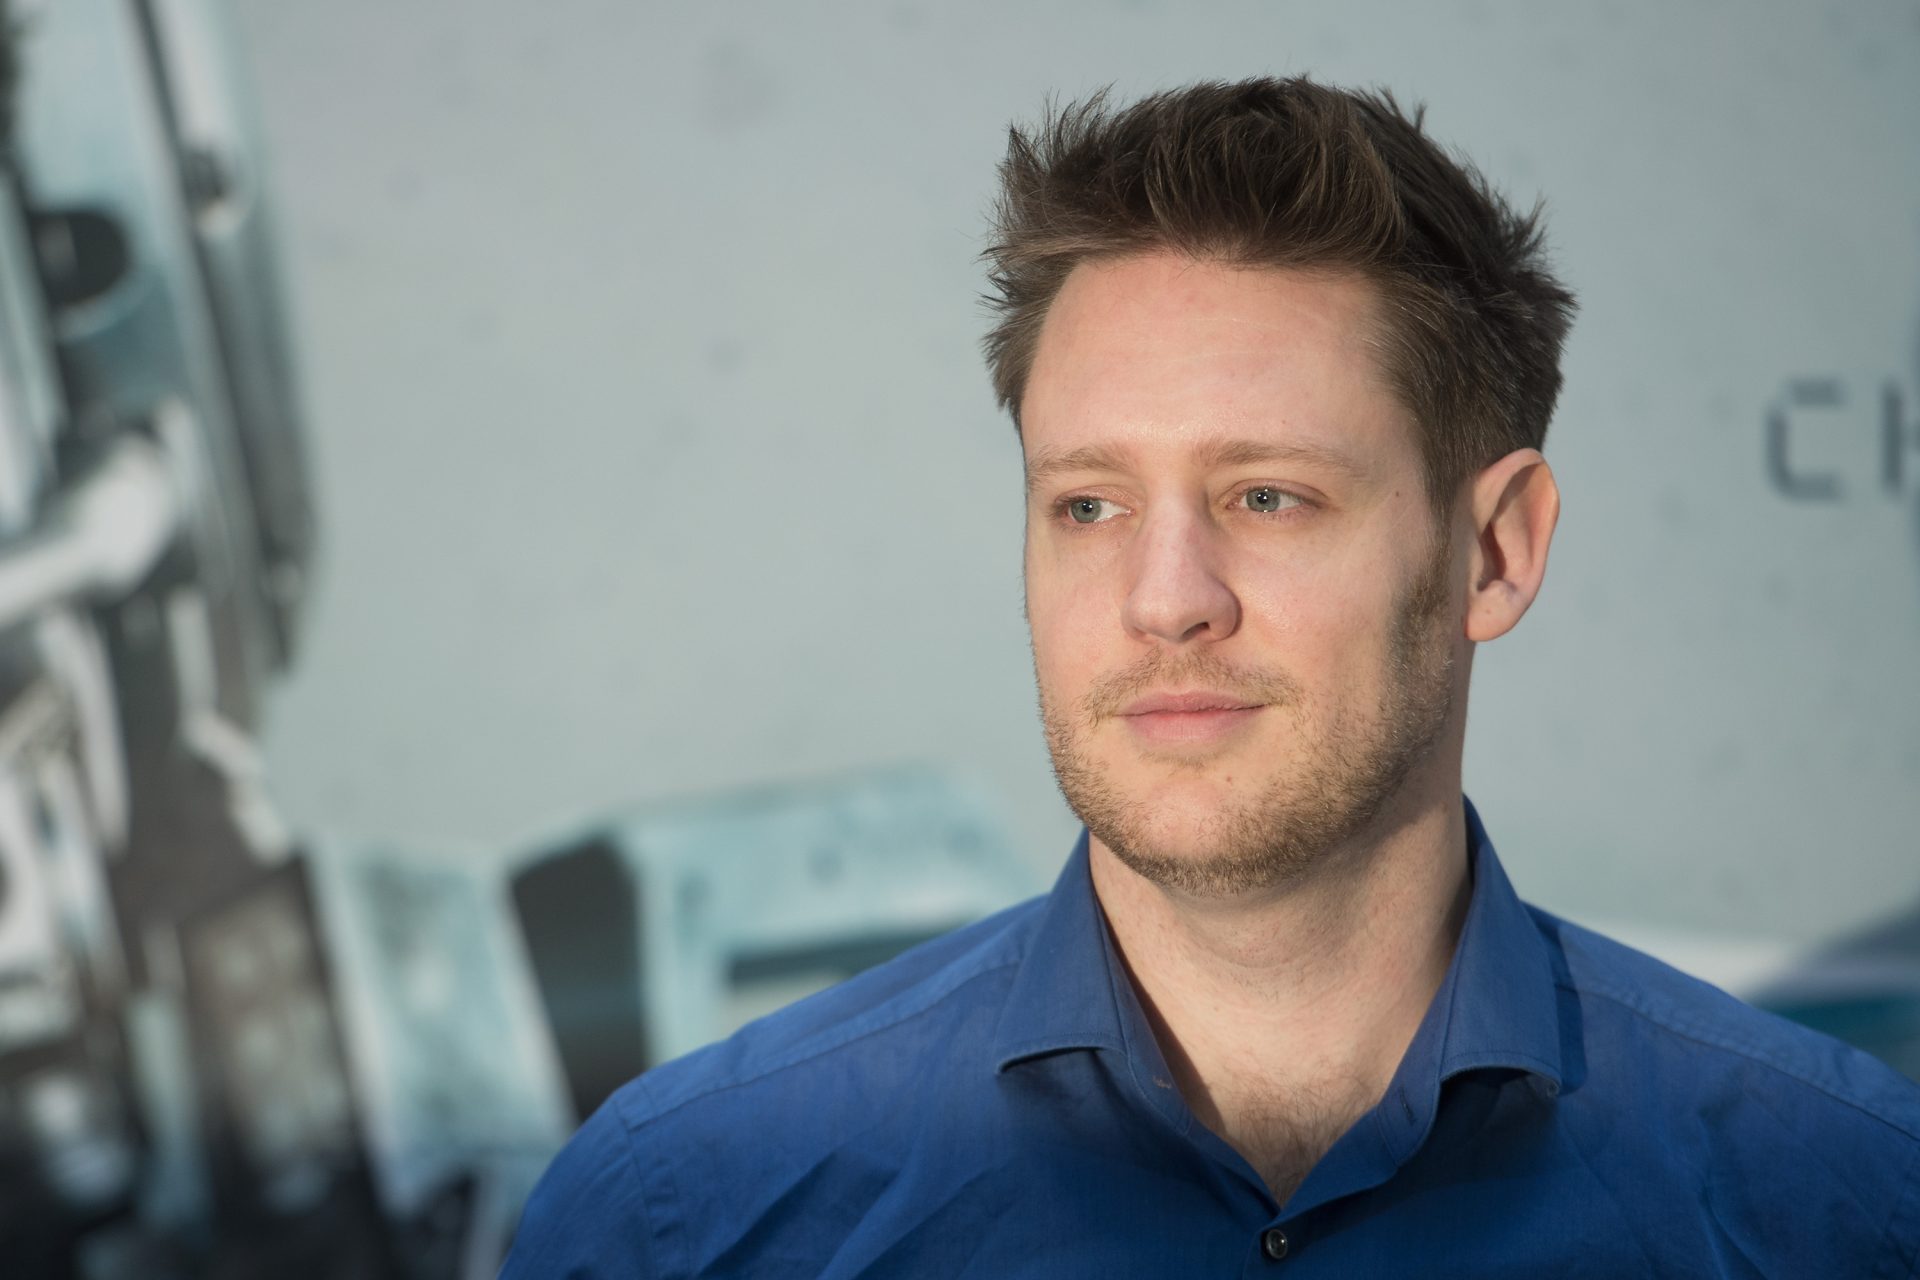 ‘District 9’ director Neill Blomkamp helps produce a brand new ‘AAA’ game